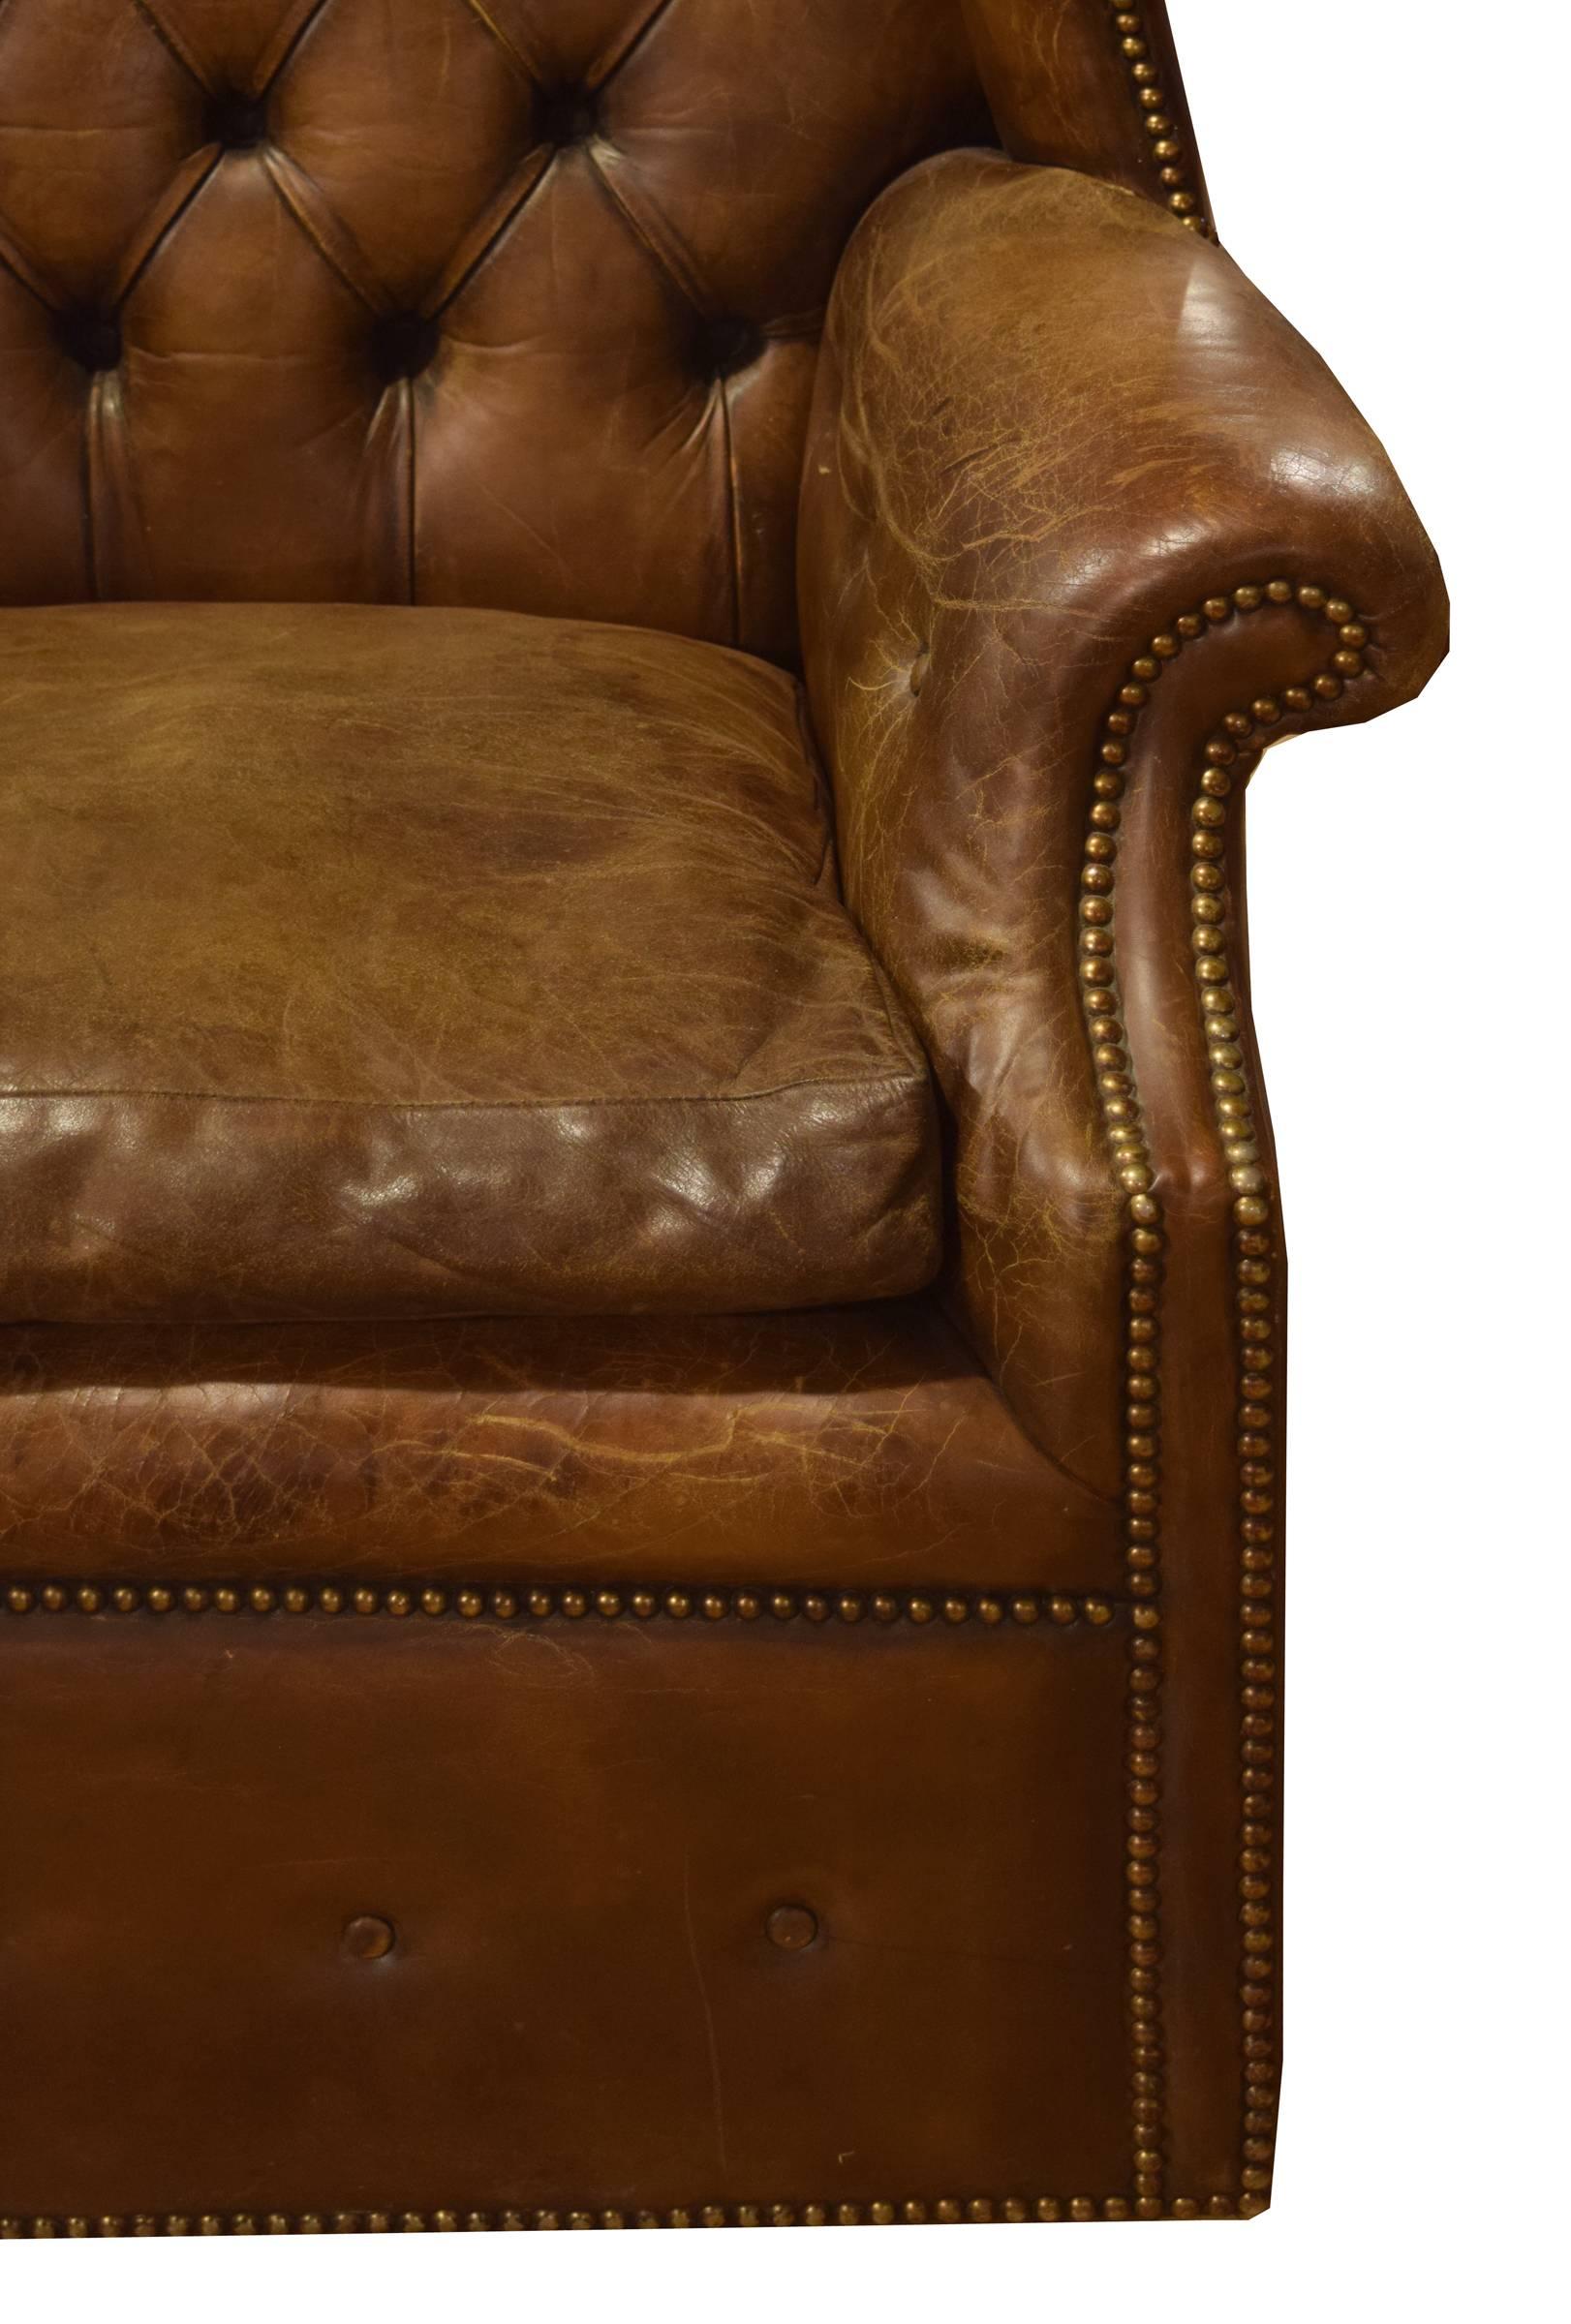 20th Century Italian Tufted Leather Wing Chair